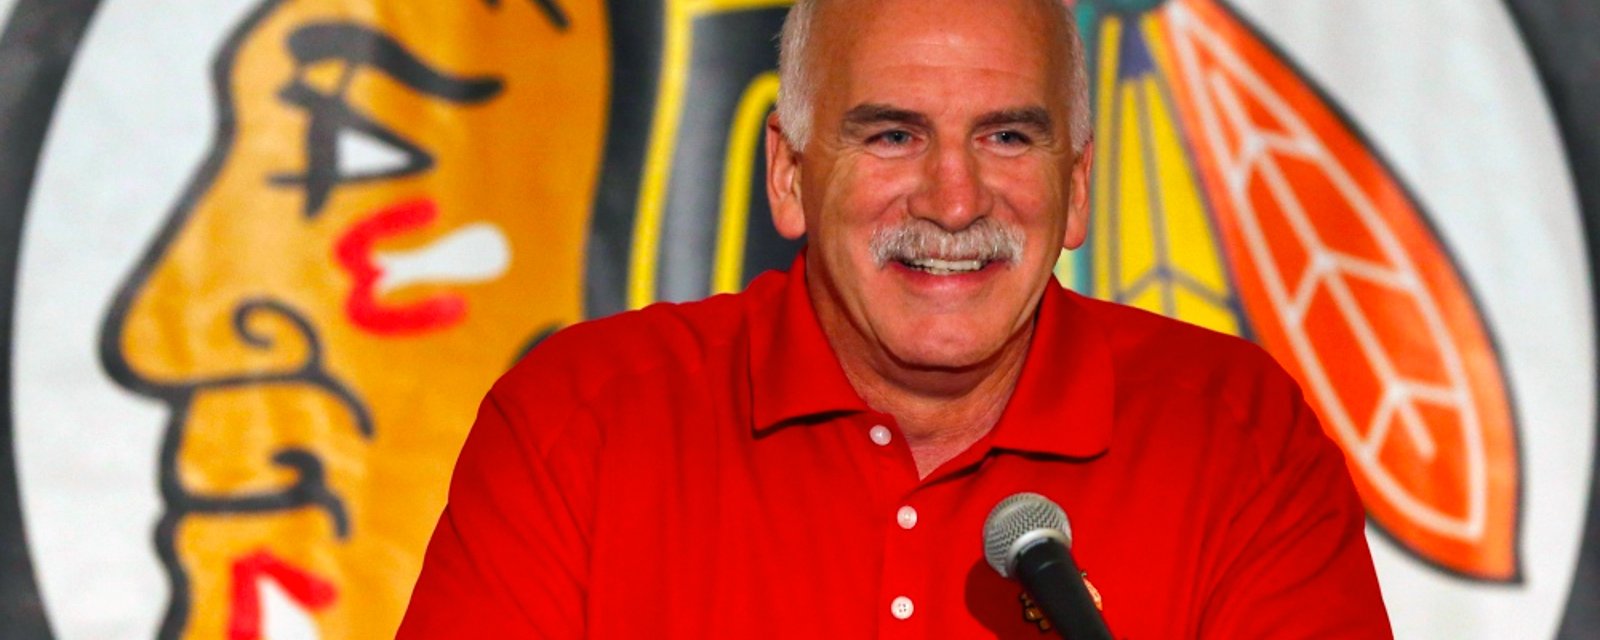 Joel Quenneville puts his foot in his mouth when questioned over Blackhawks abuse scandal